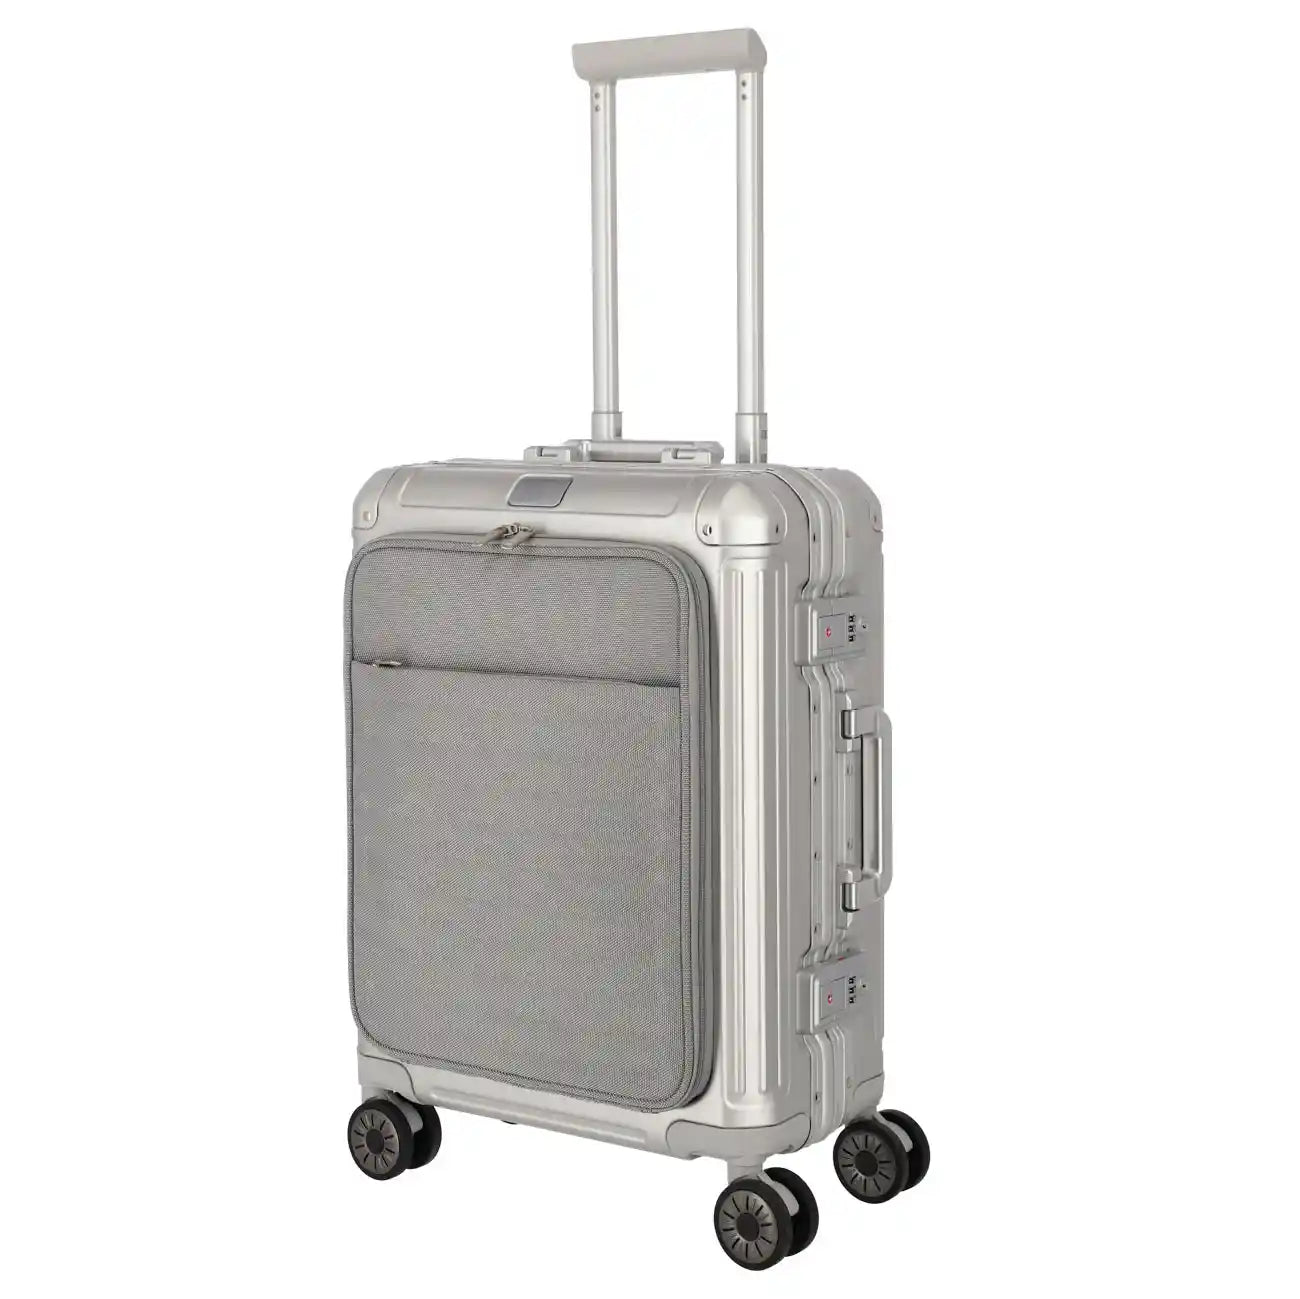 Travelite Next 2.0 4-wheel trolley S with front pocket - silver